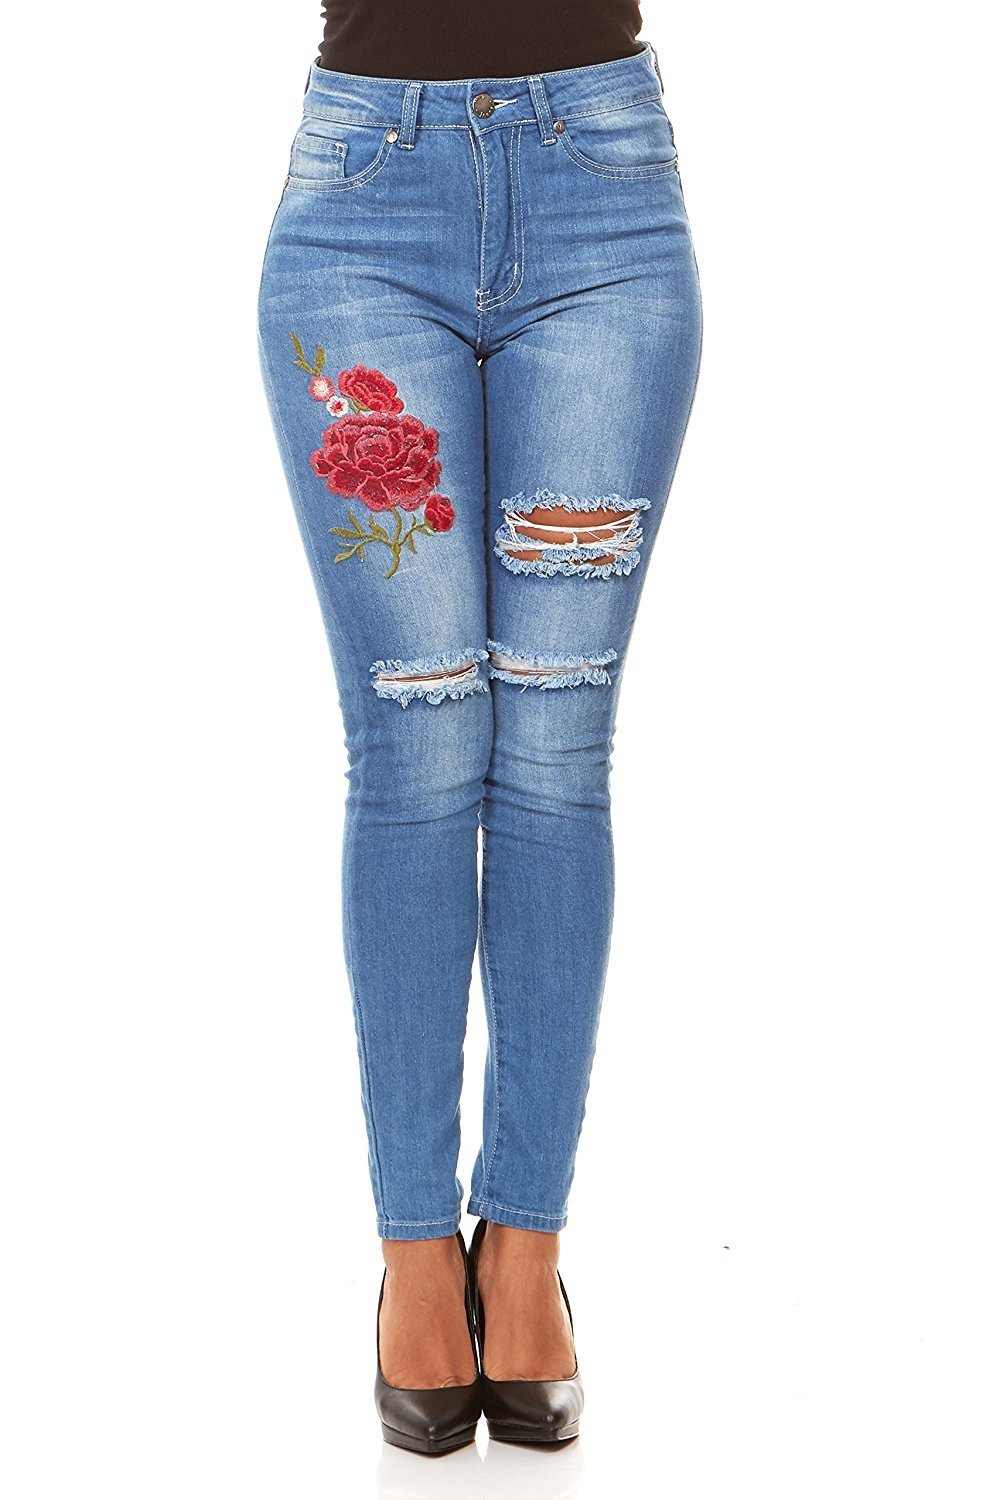 VIP Jeans for women | Ripped and Distressed High Waisted Slim Fit Skinny Stretchy jeans with Flower Embroidery | Junior sizes stylish colors and washes - image 1 of 4